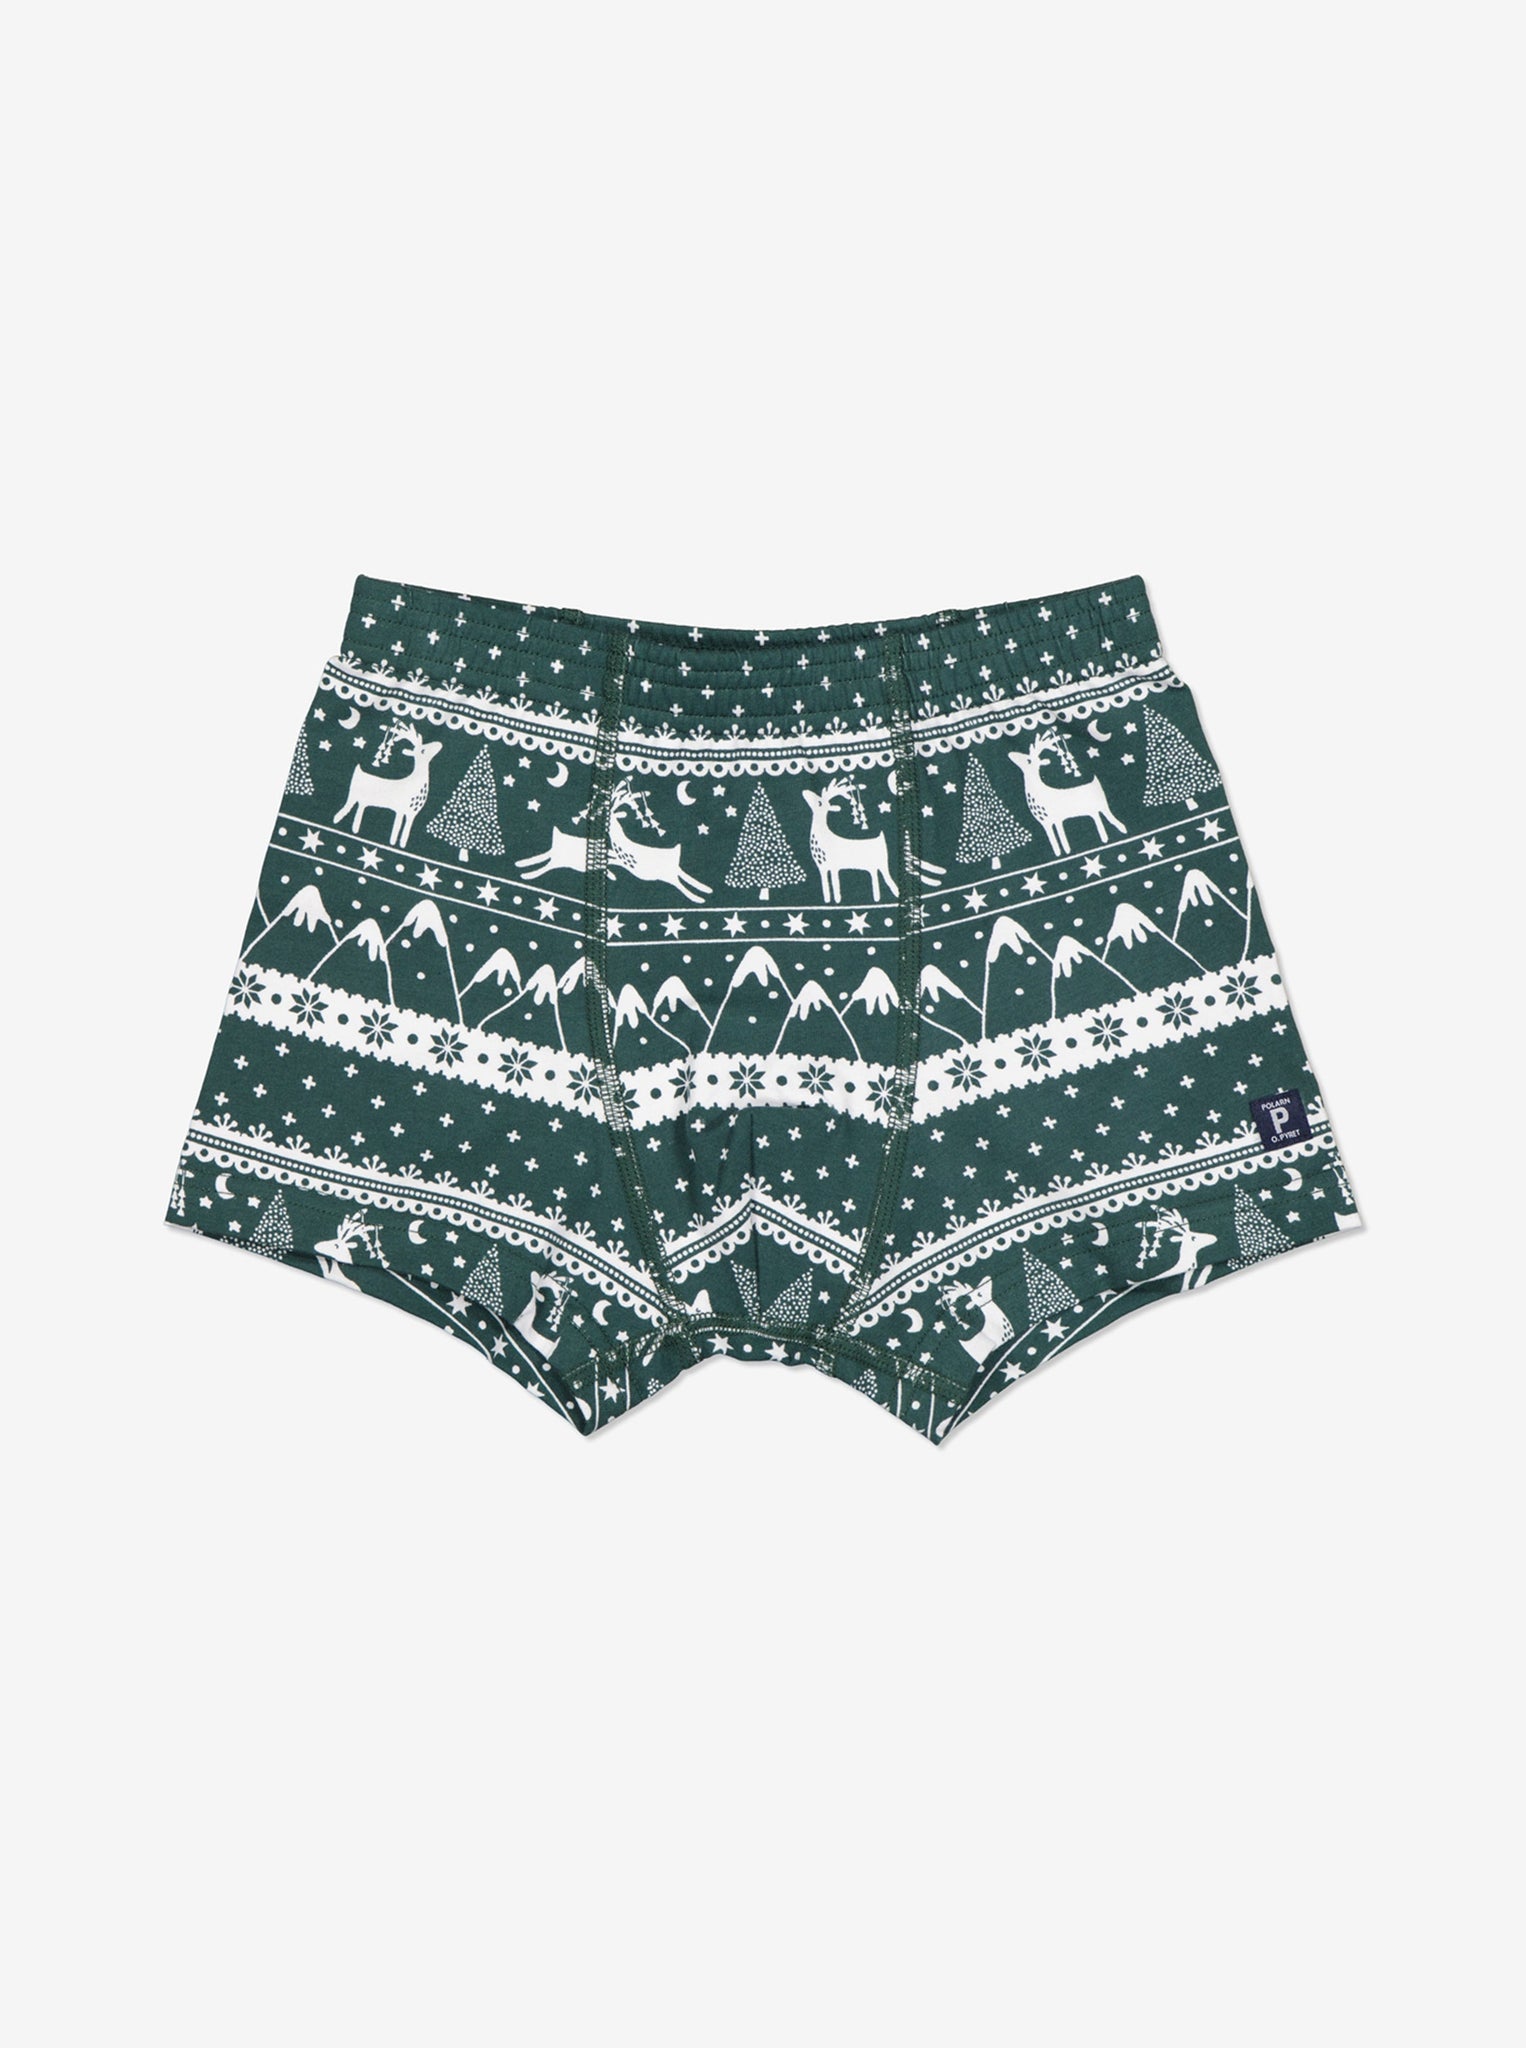 Christmas Organic Cotton Boys Boxers from the Polarn O. Pyret kidswear collection. The best ethical kids clothes